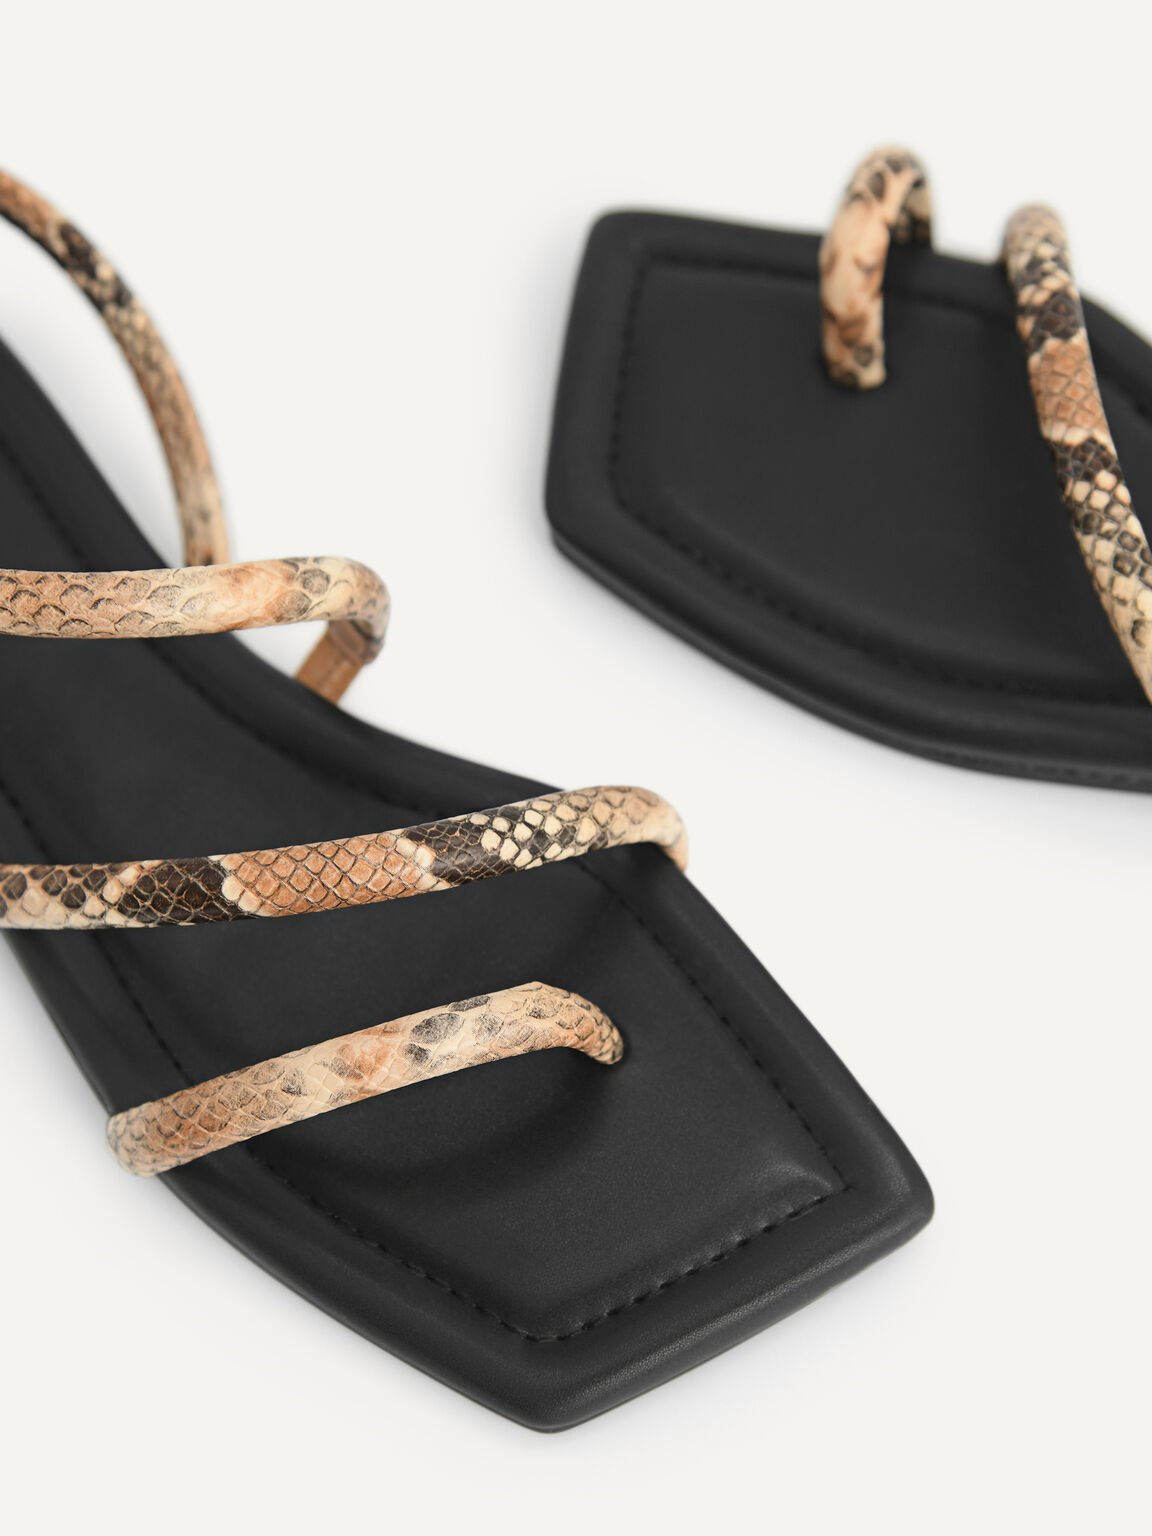 Snake-Effect Strappy Sandals, Multi